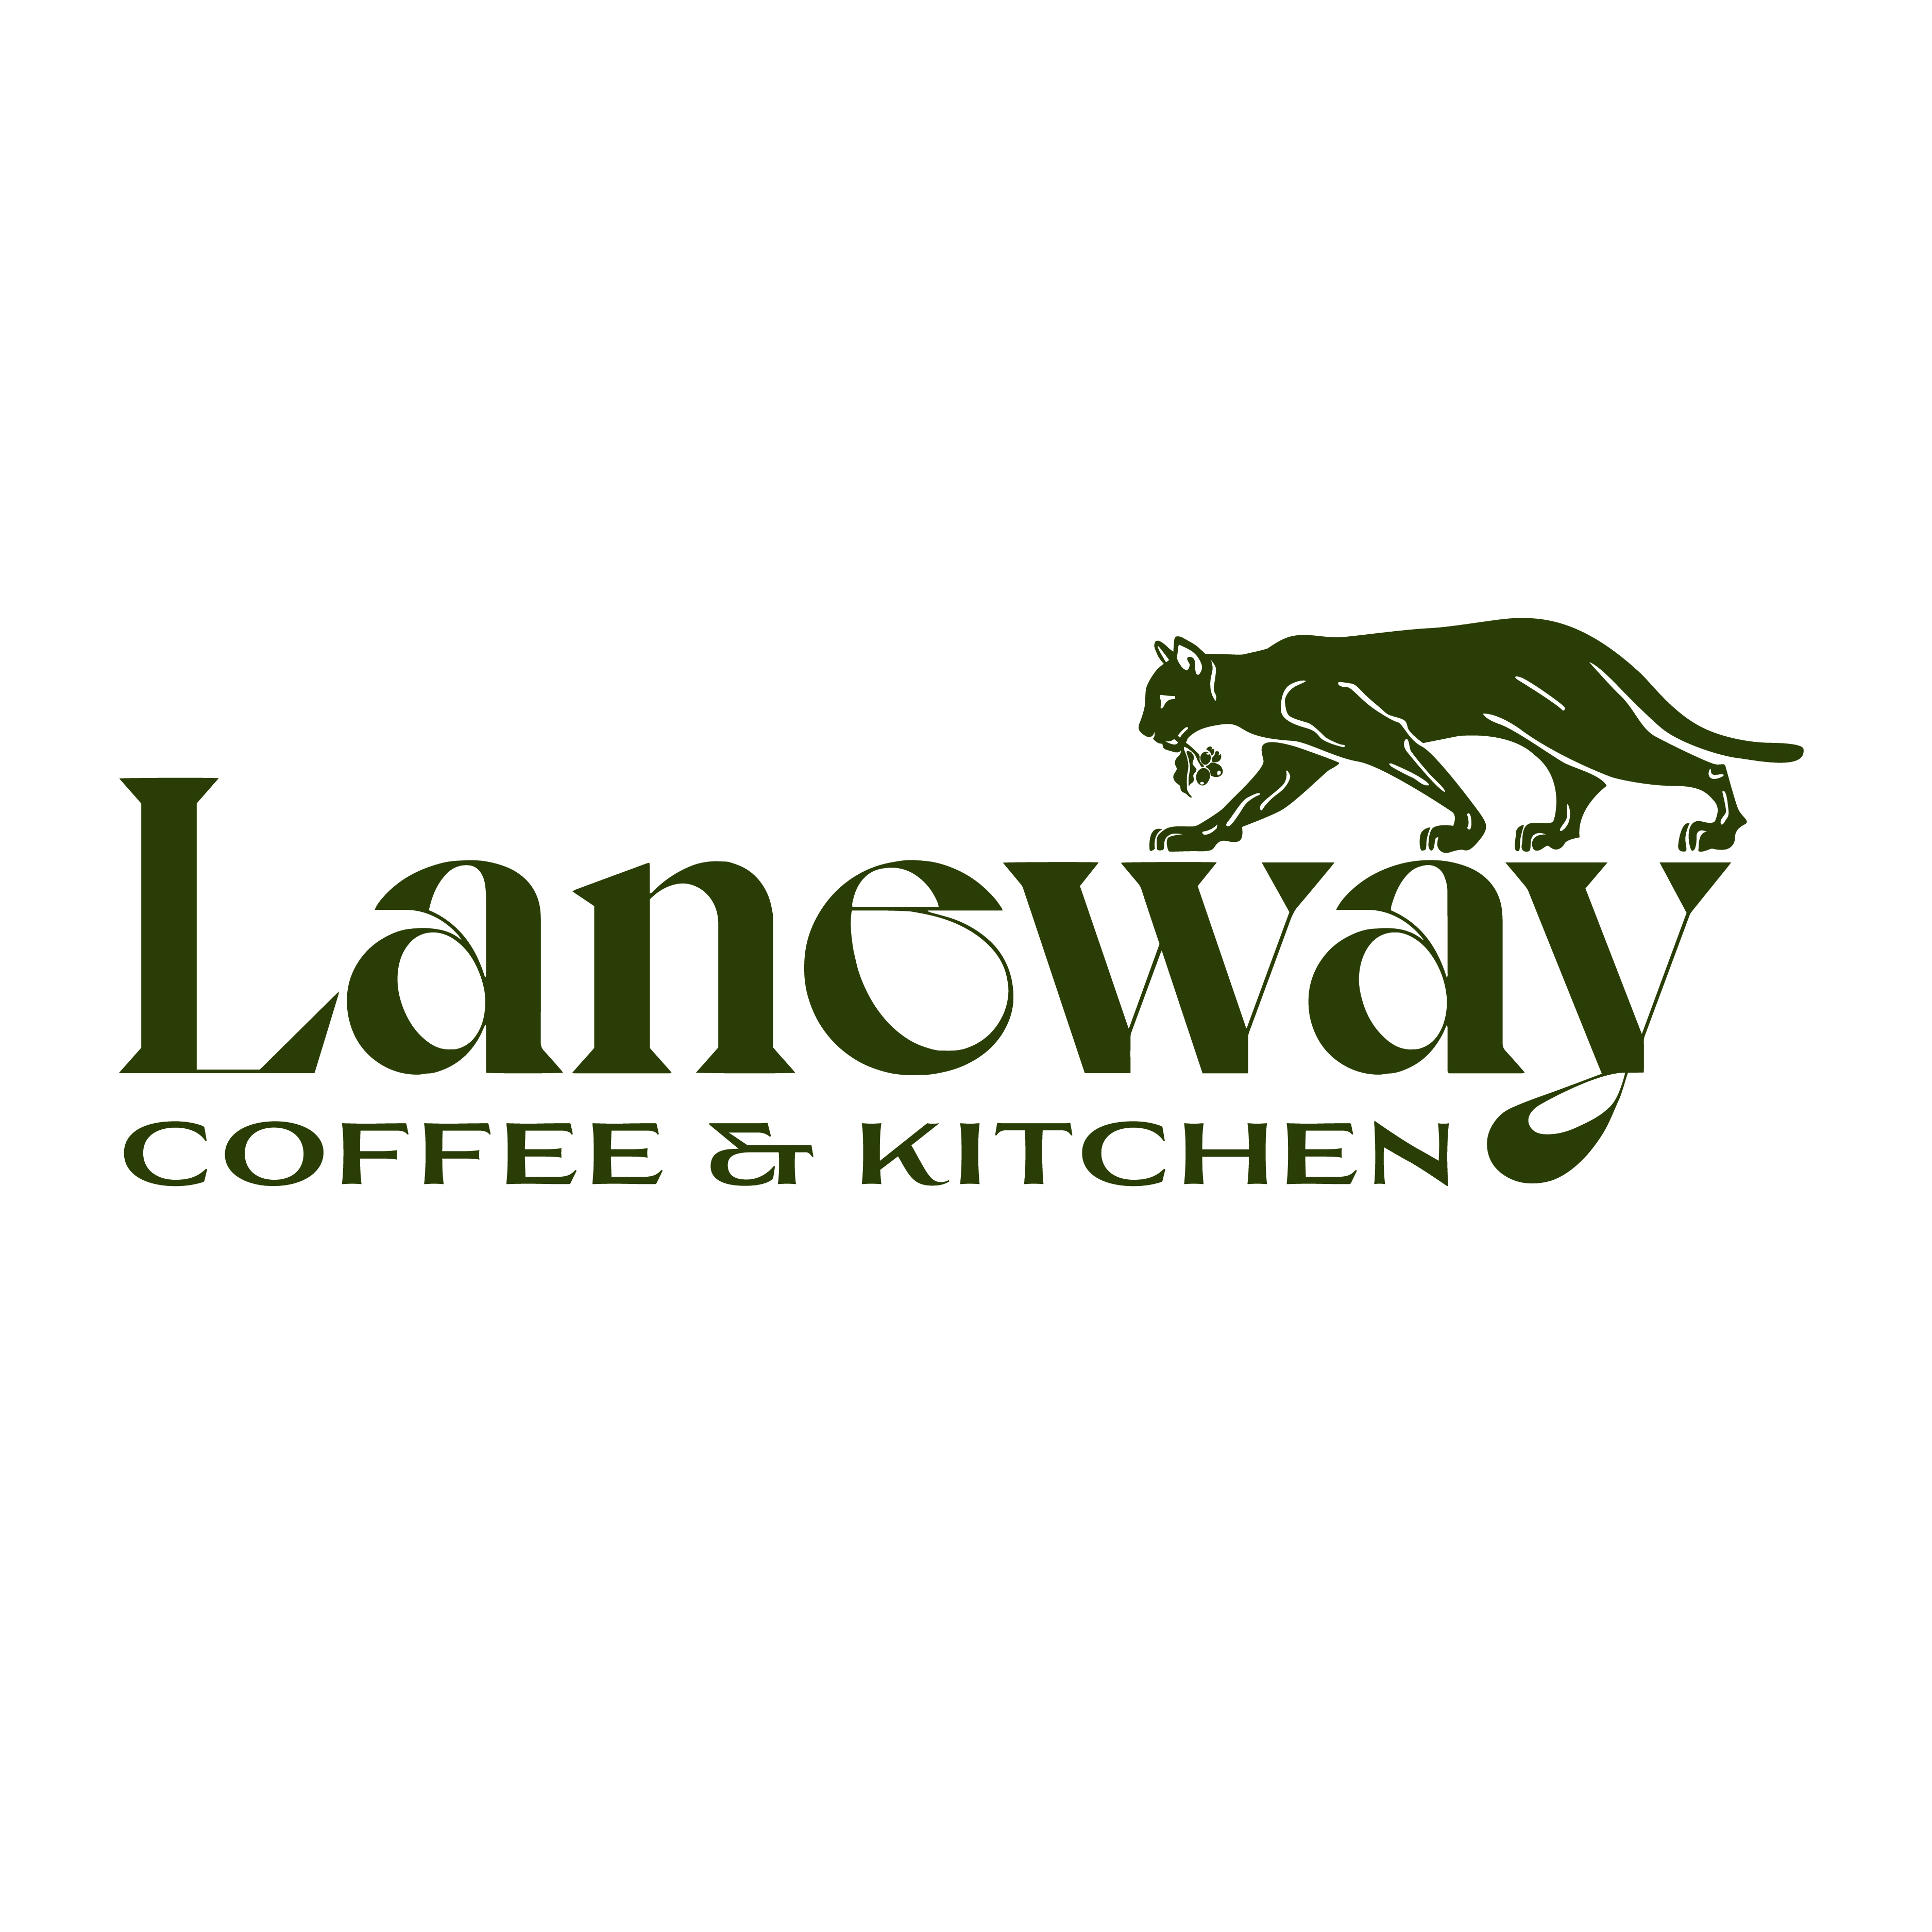 Laneway Coffee & Kitchen logo design by logo designer Caribou Creative for your inspiration and for the worlds largest logo competition